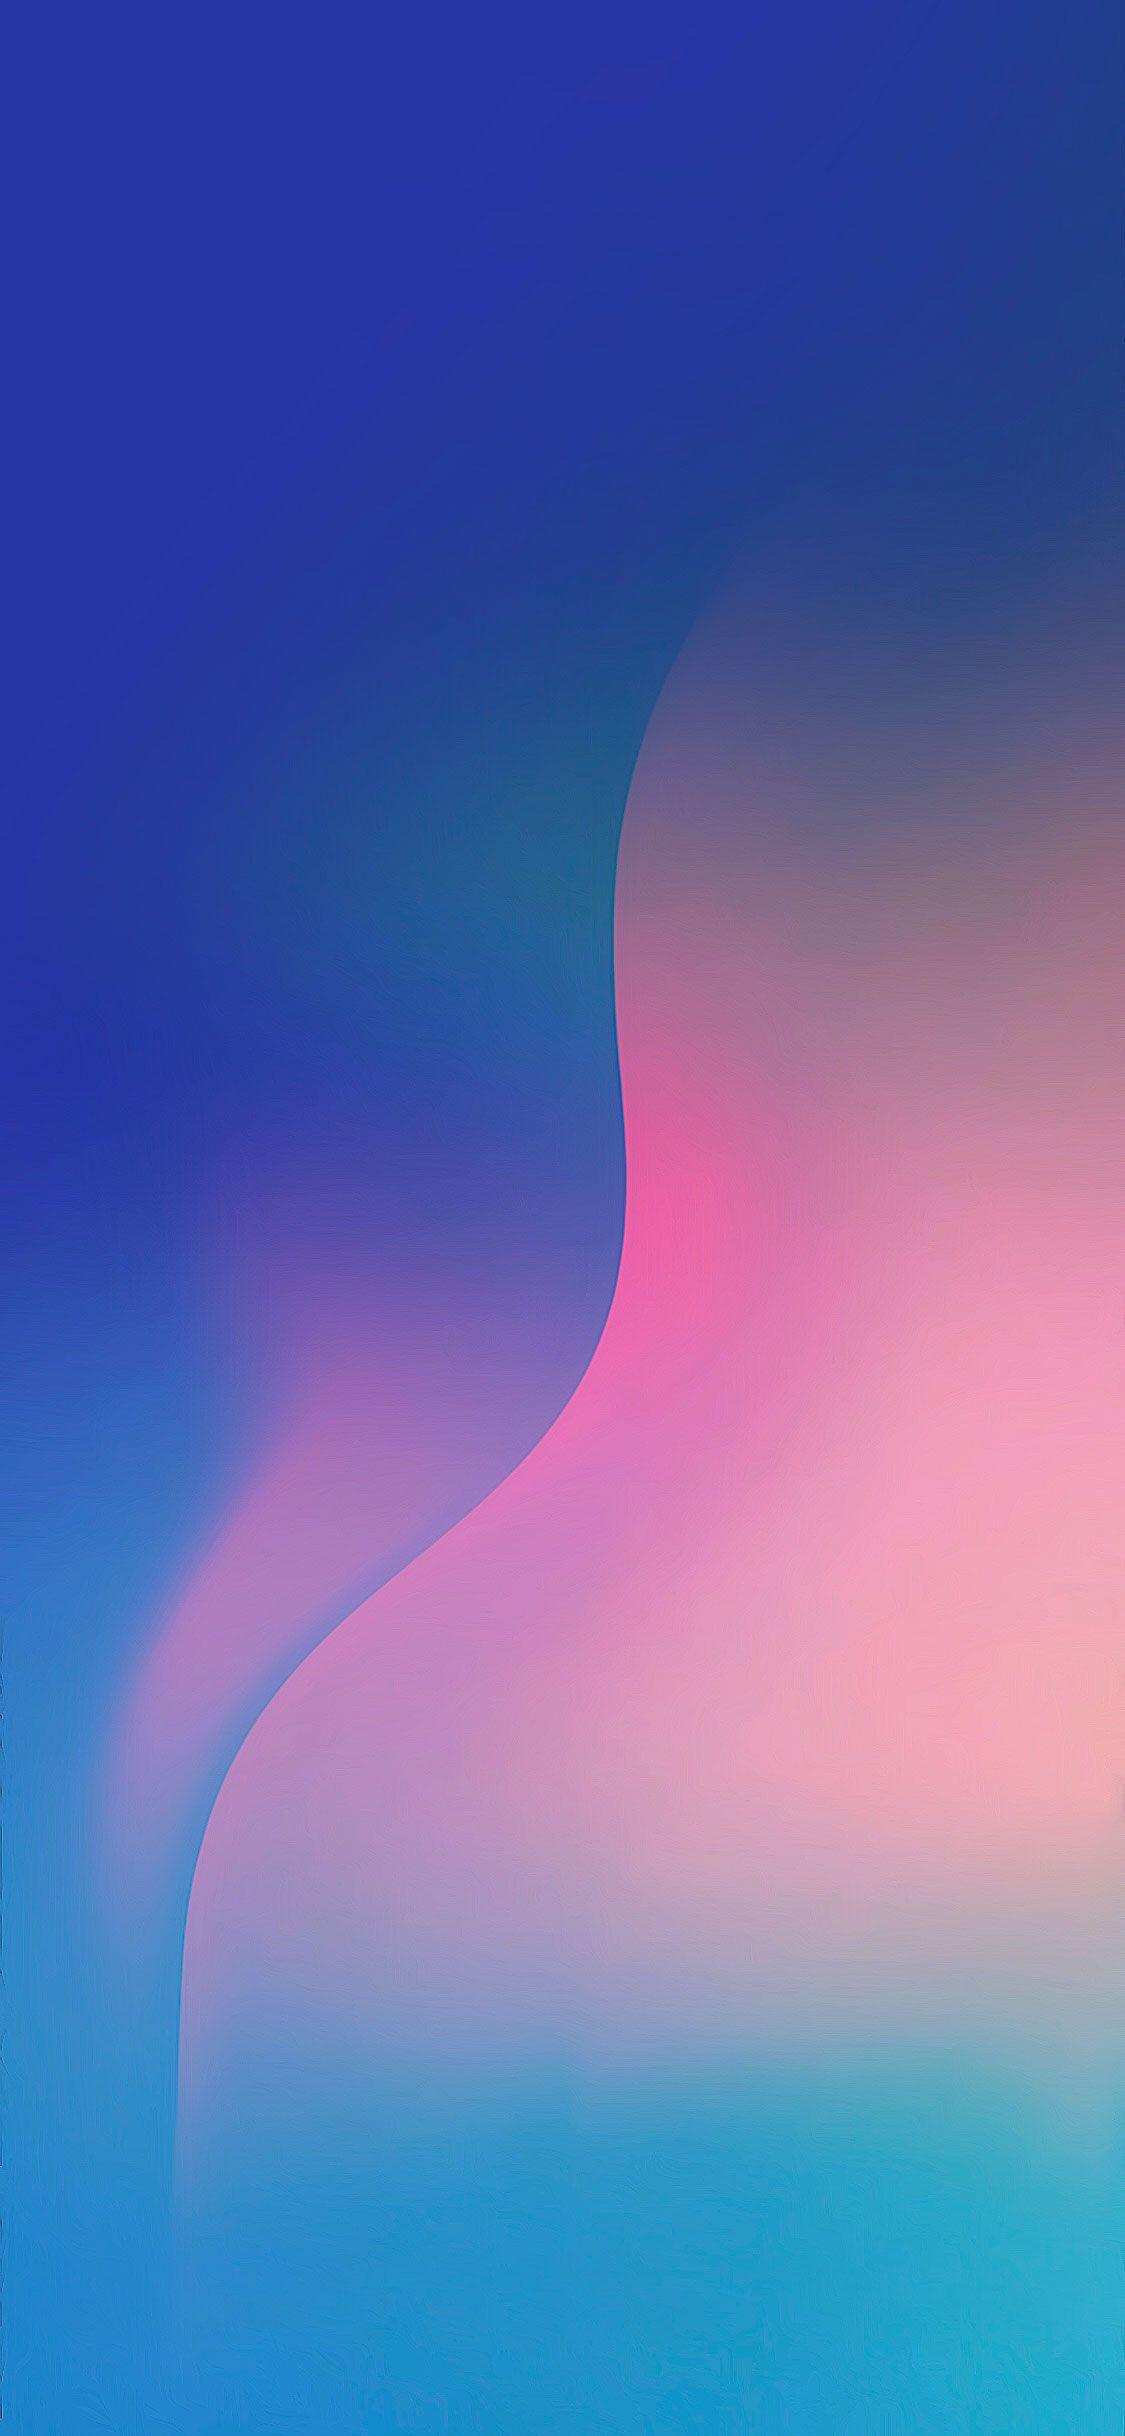 iPhone X Full HD Wallpapers - Wallpaper Cave